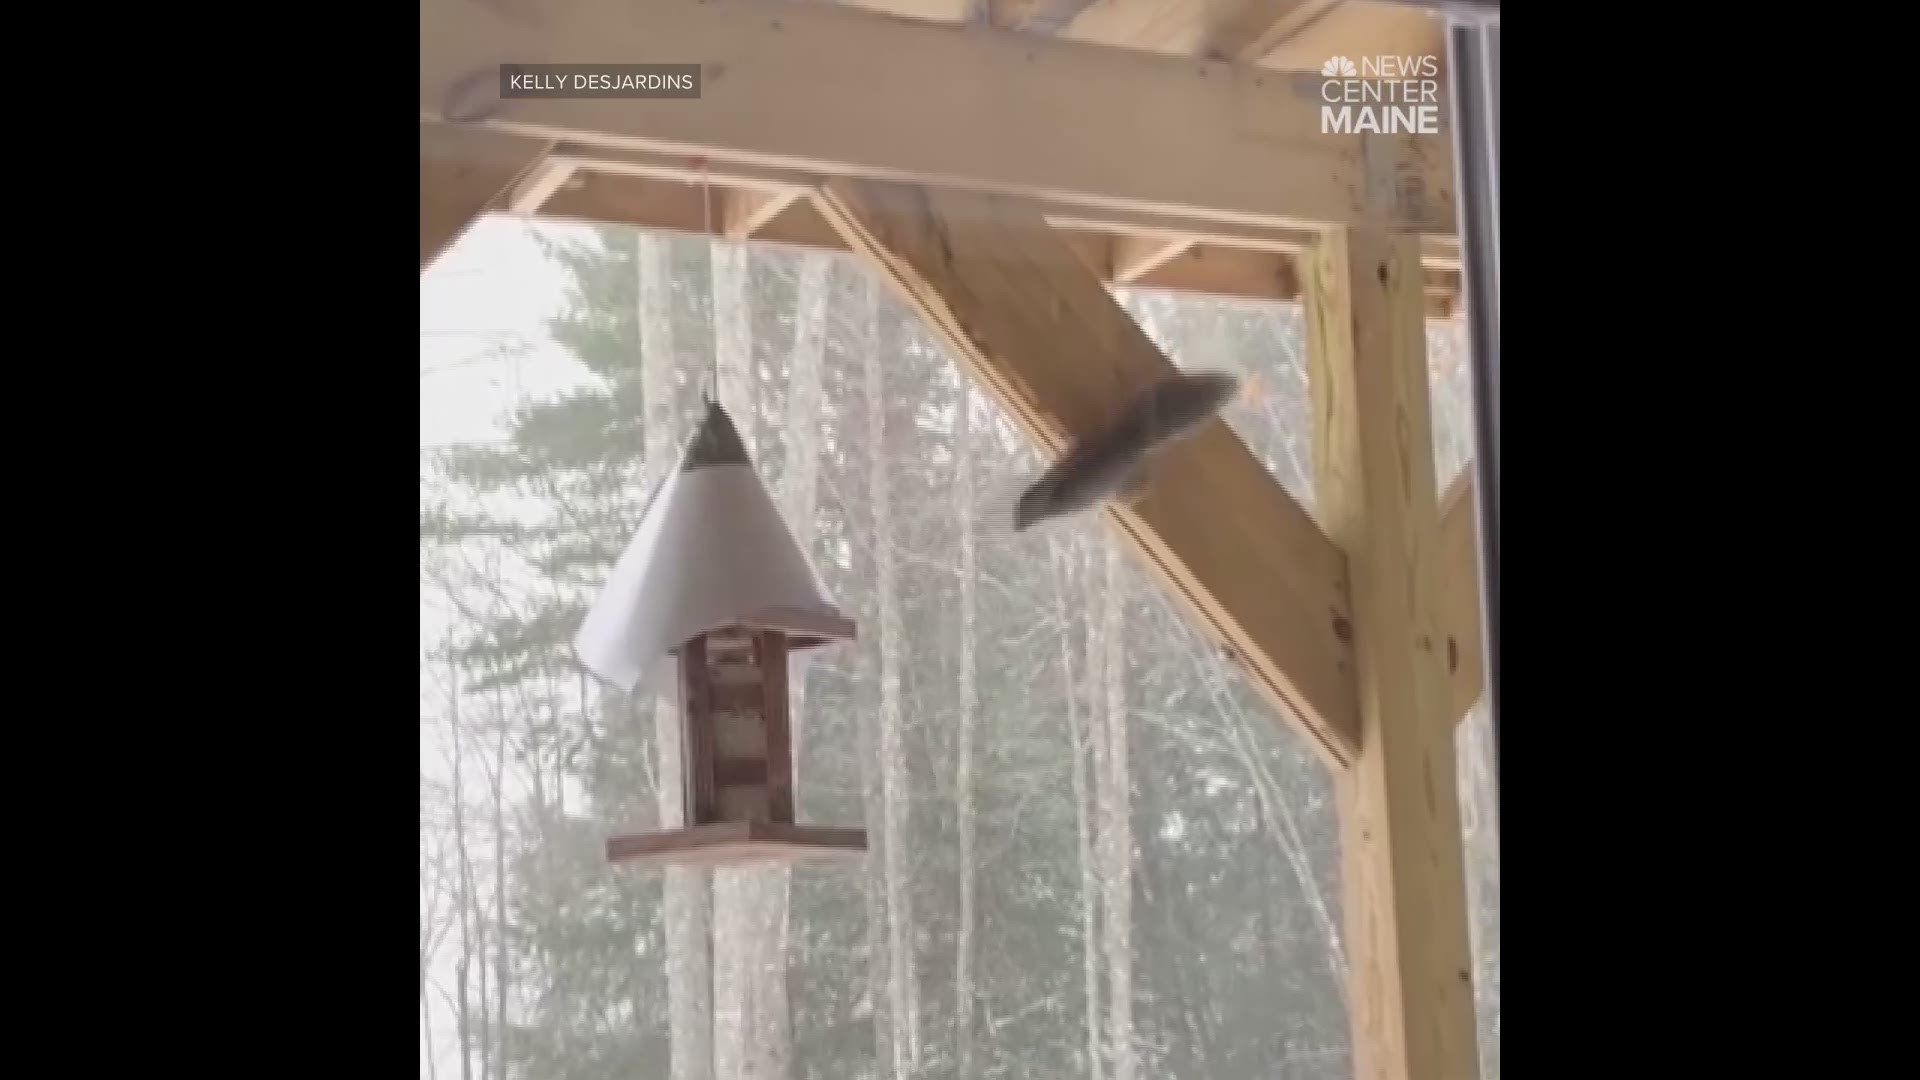 Squirrel finally gets feeder, but dog chases it away